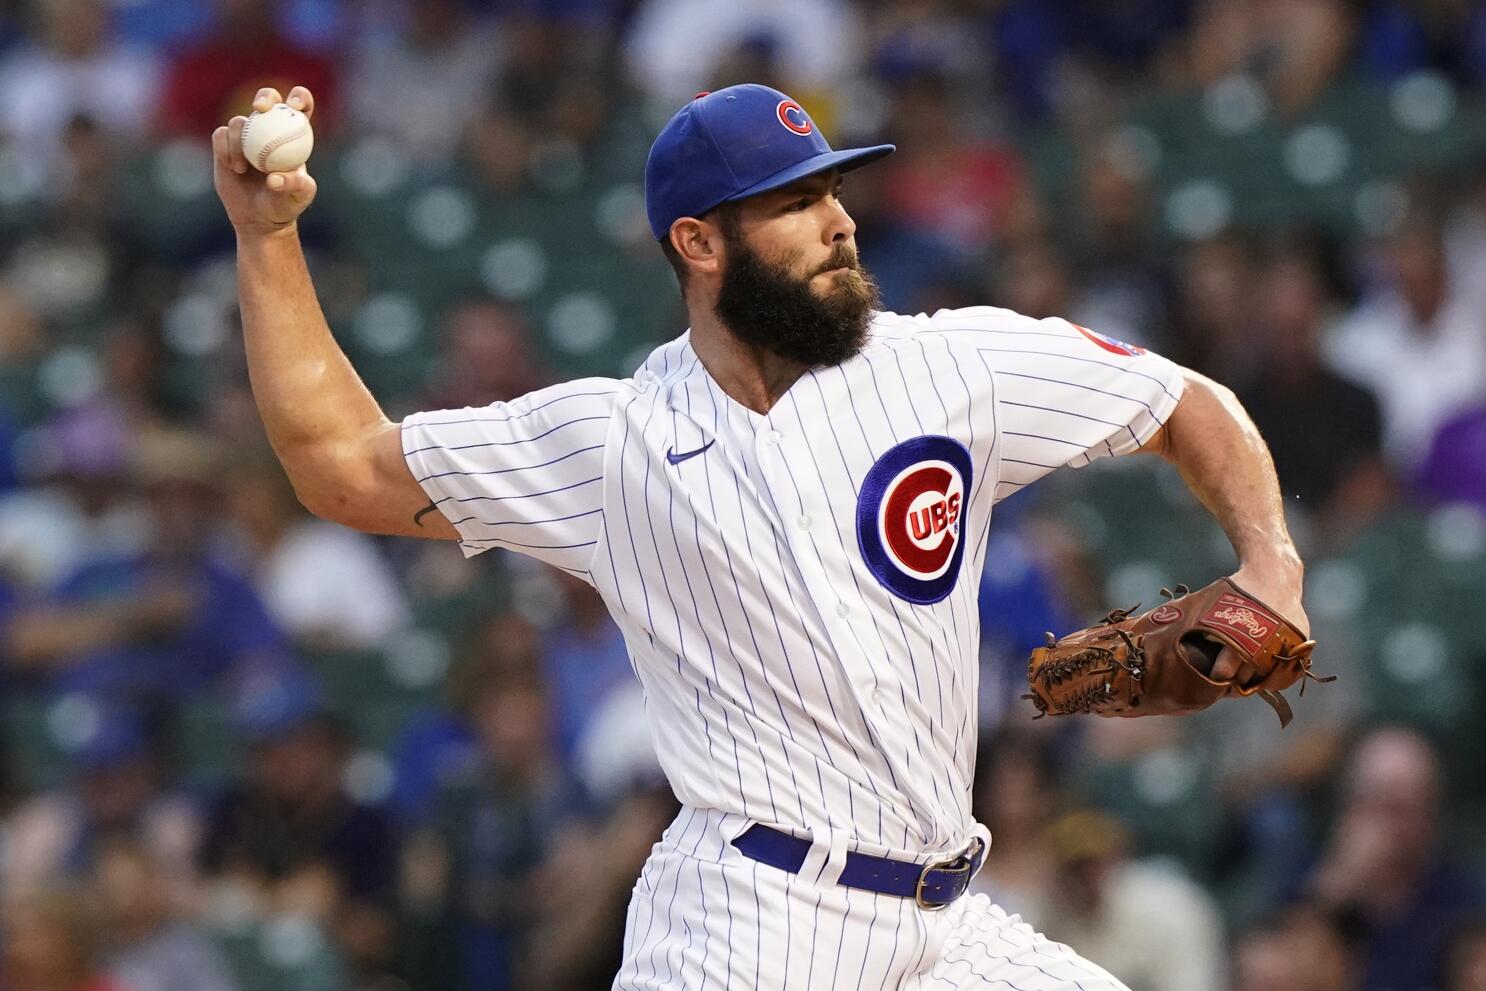 Jake Arrieta Was One of the Best Cubs Pitchers We've Seen